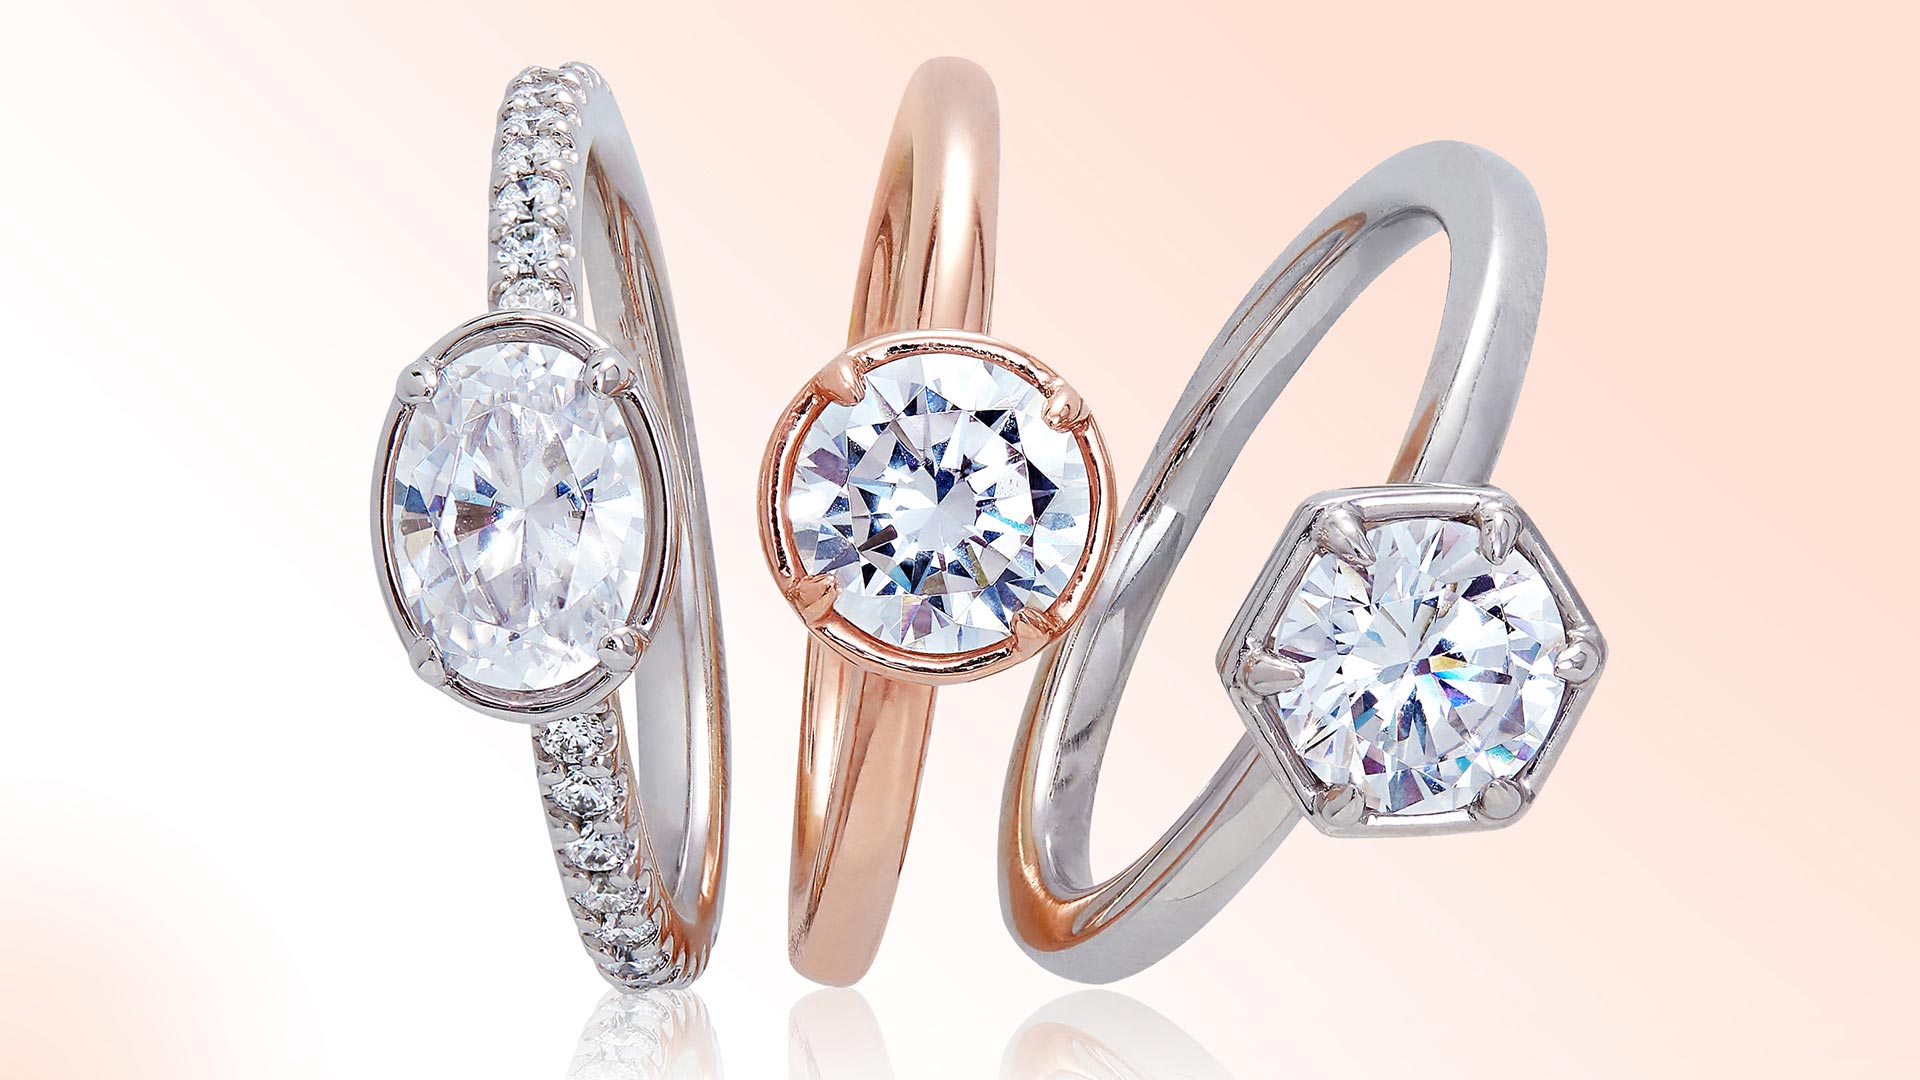 Diamond rings photographed by professional jewelry photographer Kate Benson.